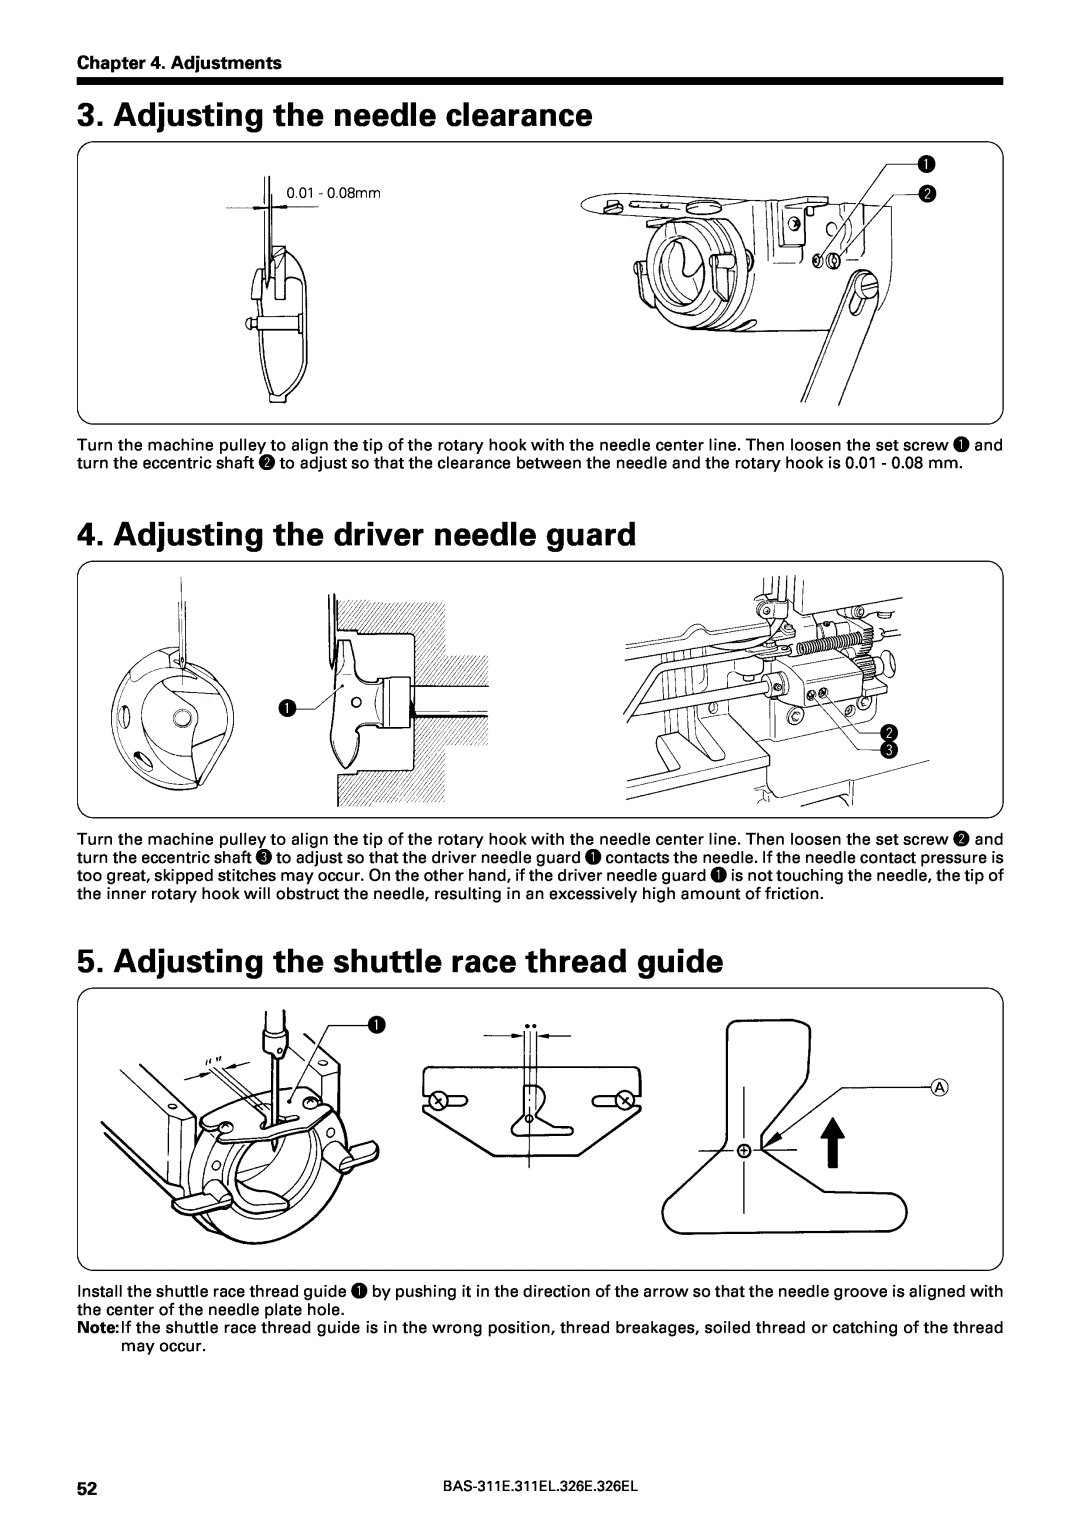 Brother BAS-311E service manual Adjusting the needle clearance, Adjusting the driver needle guard, Adjustments, q w e 